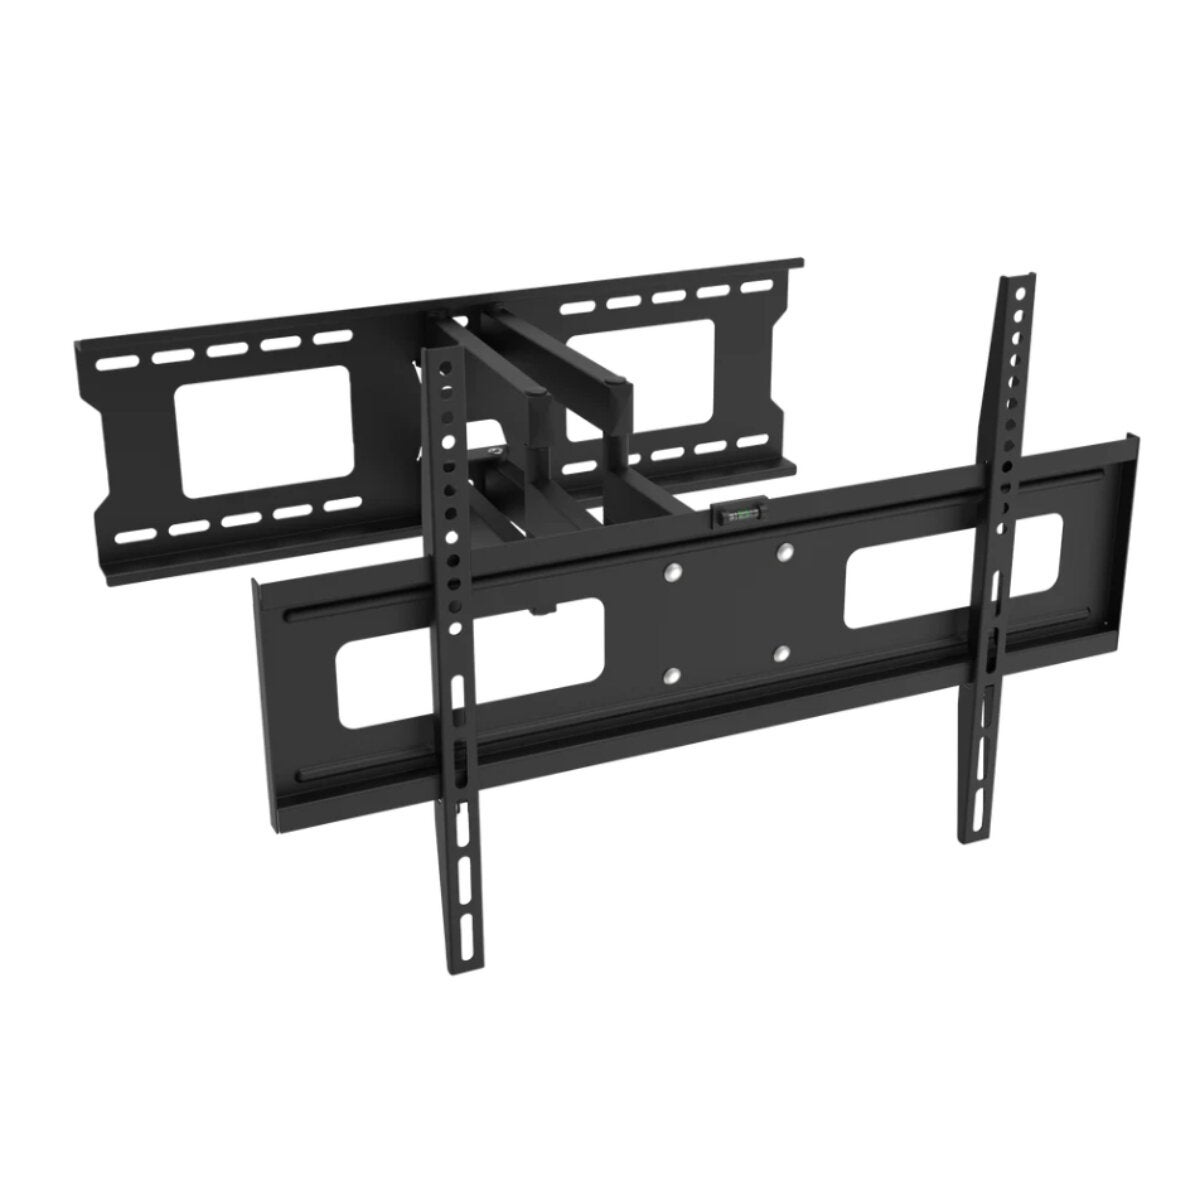 Image of Crest Full Motion TV Wall Mount for 37 to 80 Inch TVs MFPLFM